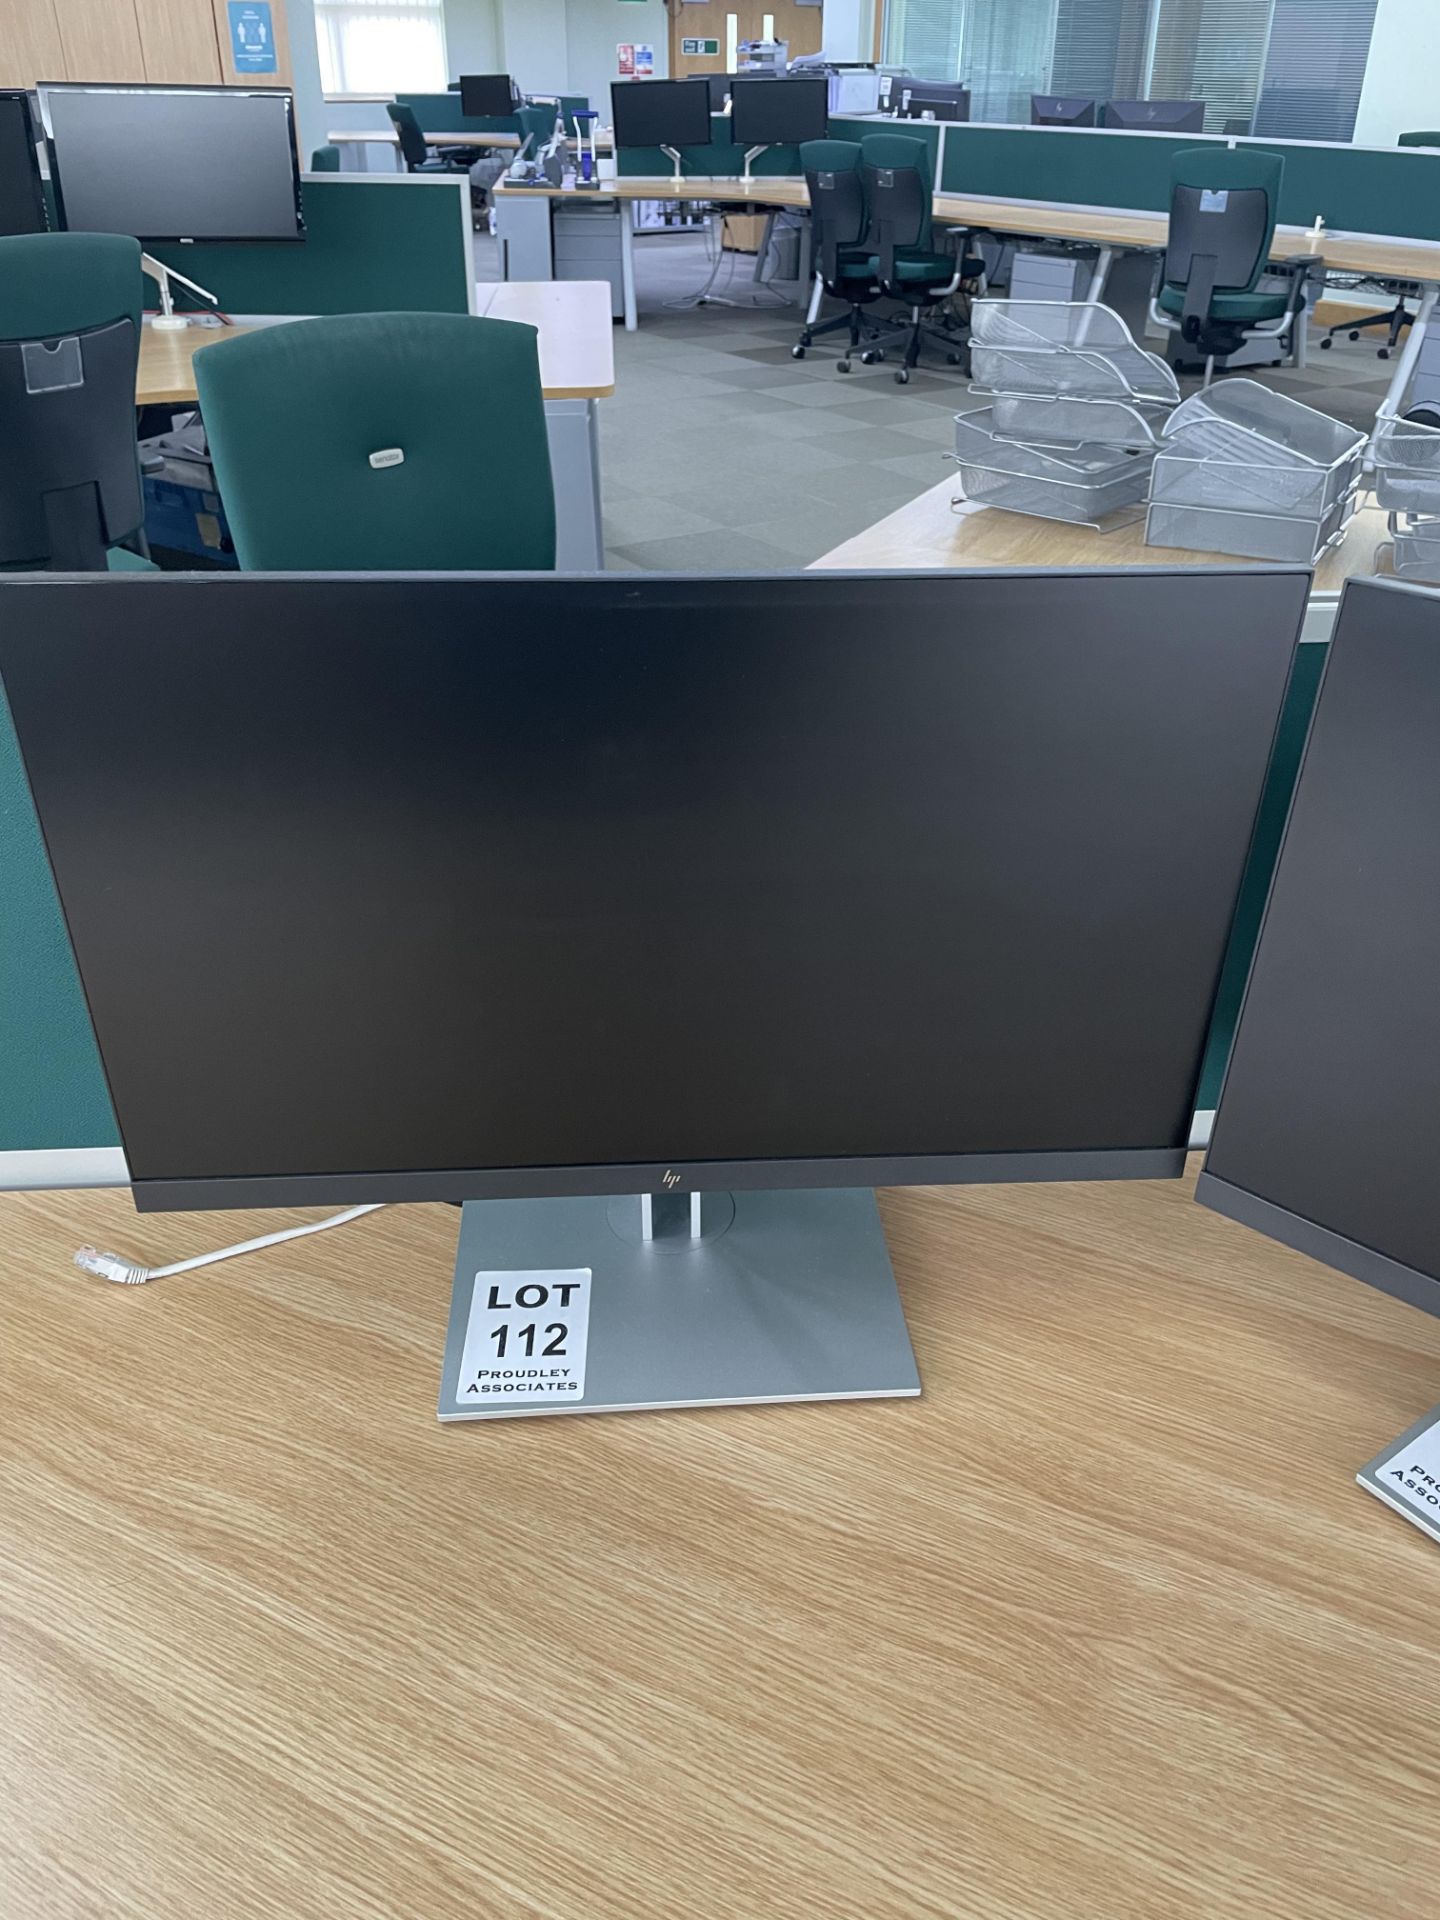 HP E24 G4 FHD 24" screen with adjustable height stand